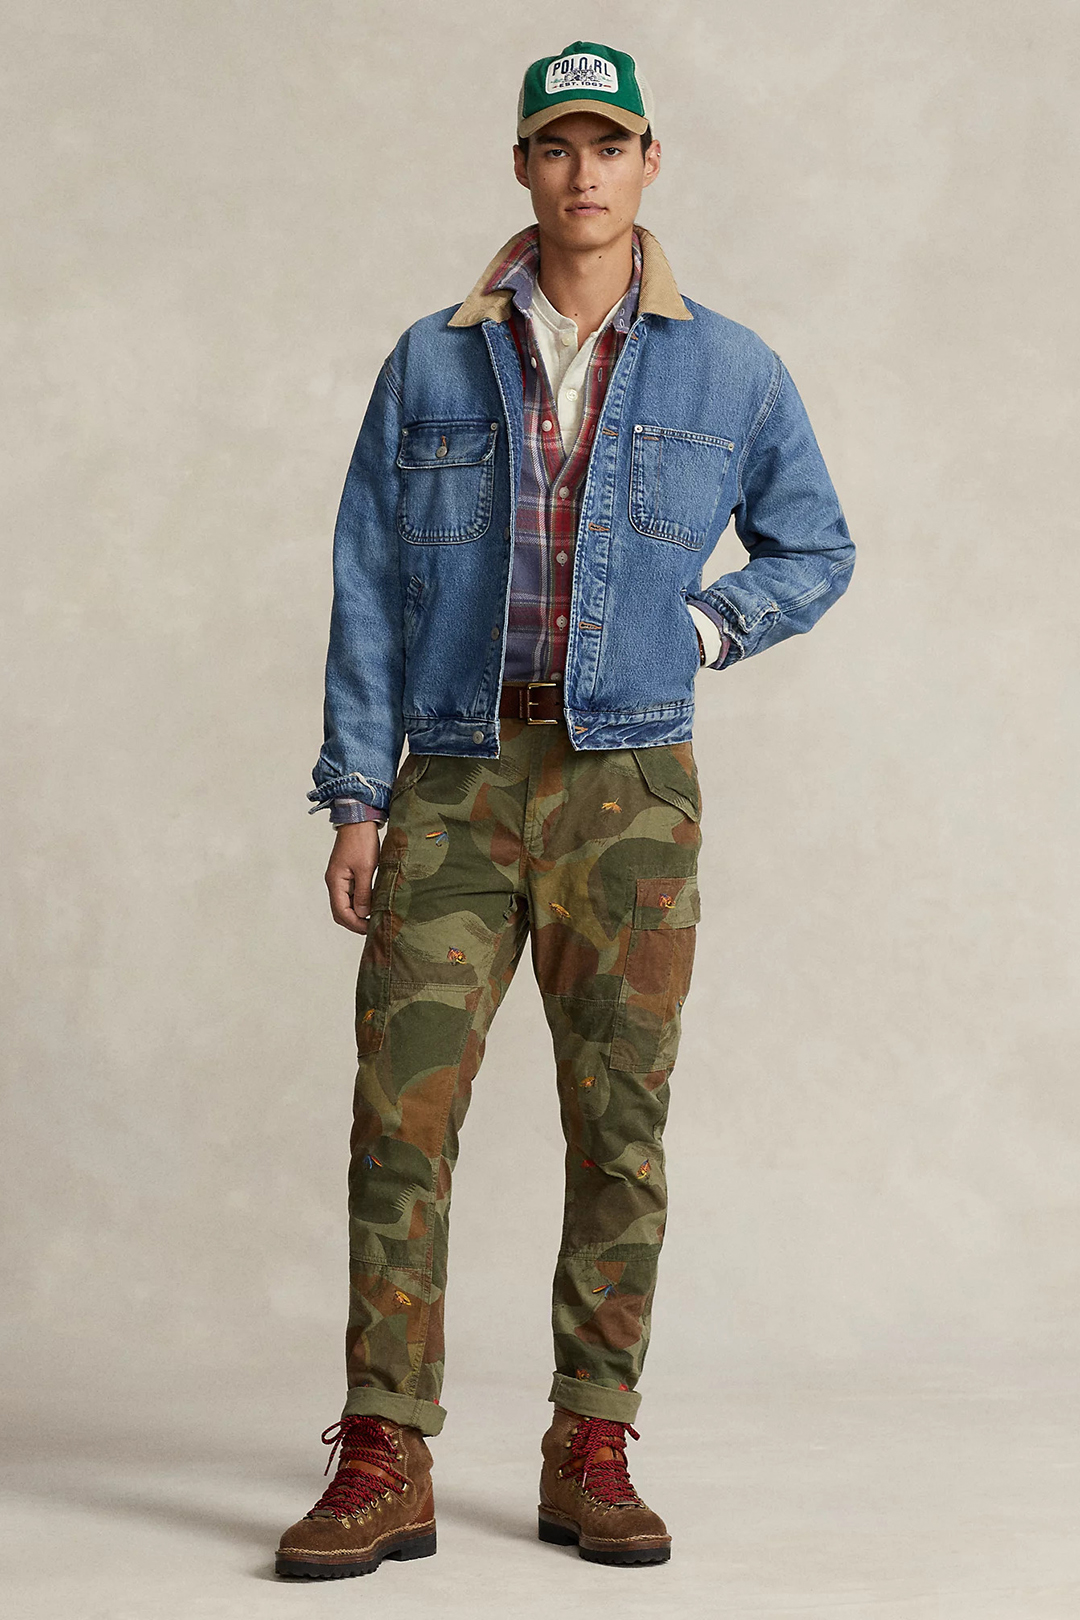 Wear a light blue denim jacket, red and blue plaid shirt, olive green camo pants, and brown sturdy boots